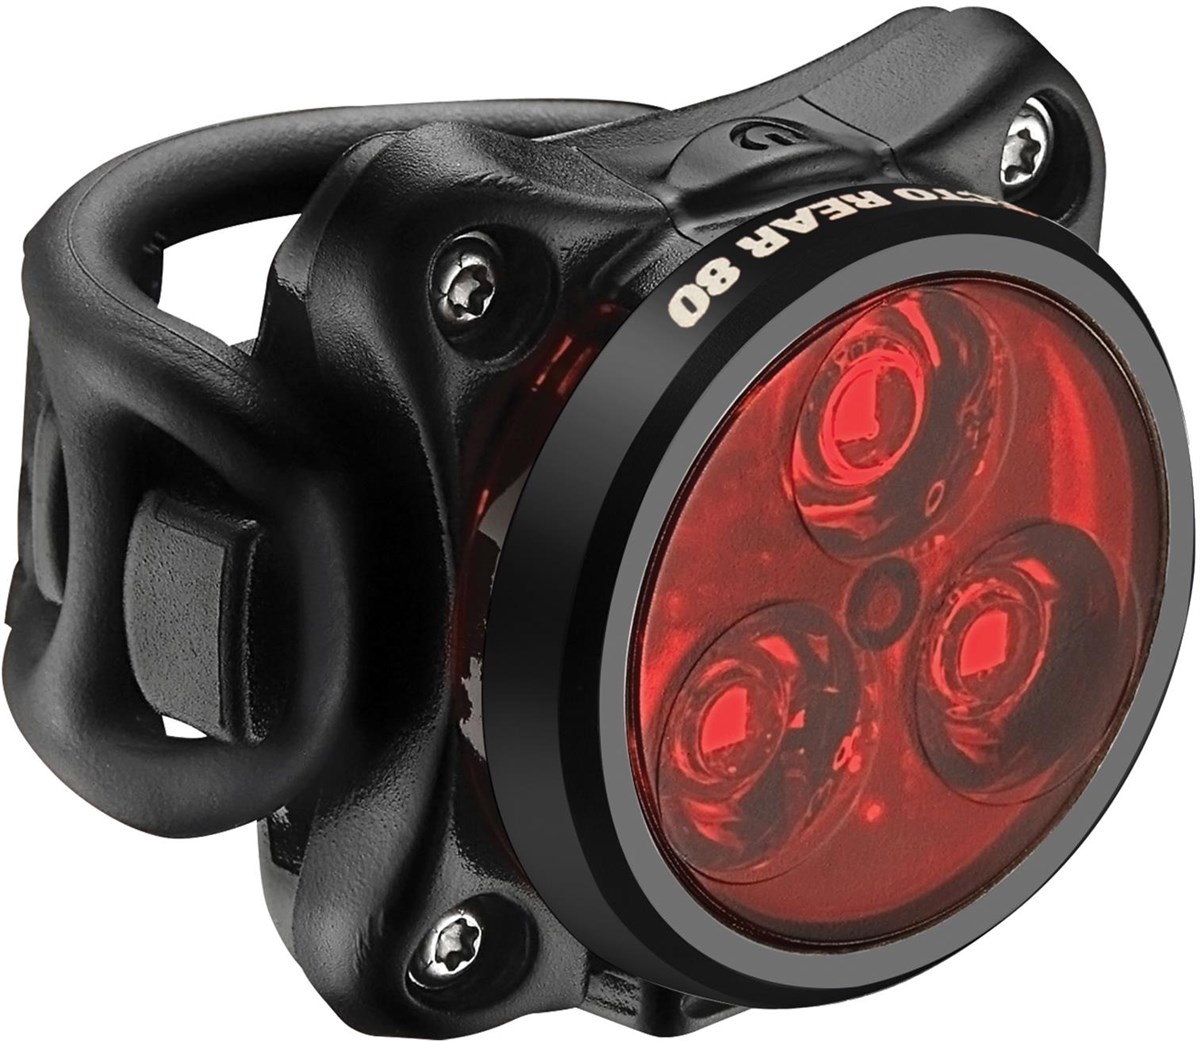 Lezyne Zecto Drive 80 USB Rechargeable Rear Light product image